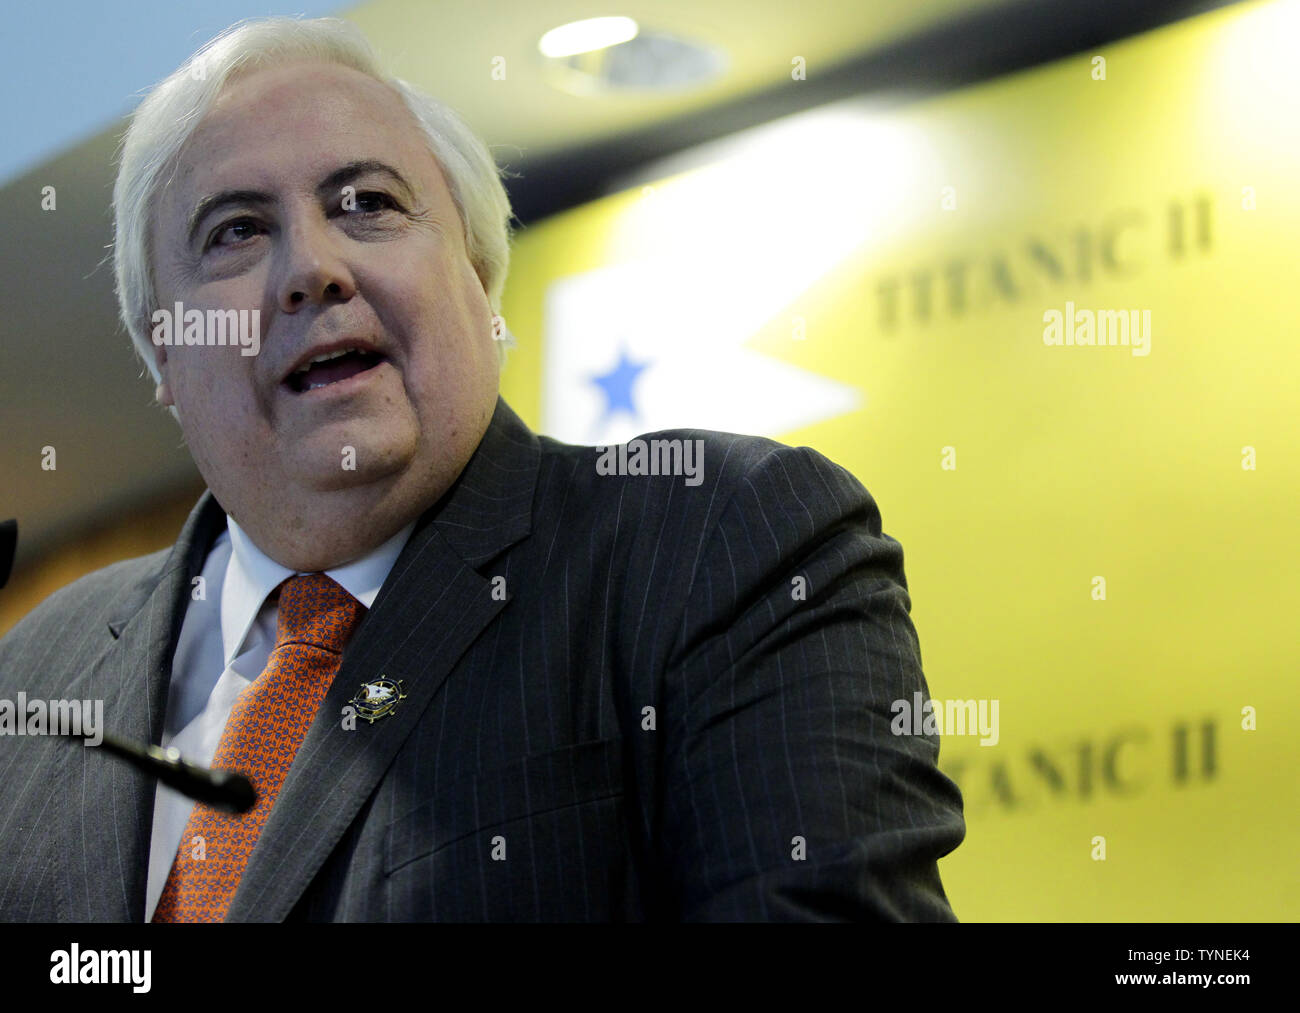 Australian billionaire and chairman of the shipping company Blue Star Line, Clive Palmer, discusses plans for the company's planned Titanic II cruise ship at the Intrepid Sea, Air & Space Museum in New York City on February 26 2013. The ship was designed by marine engineering company Deltamarin Ltd. of Raisio, Finland, and is scheduled to be completed by 2016 by the CSC Jinling Shipyard Co. in China.    UPI/John Angelillo Stock Photo